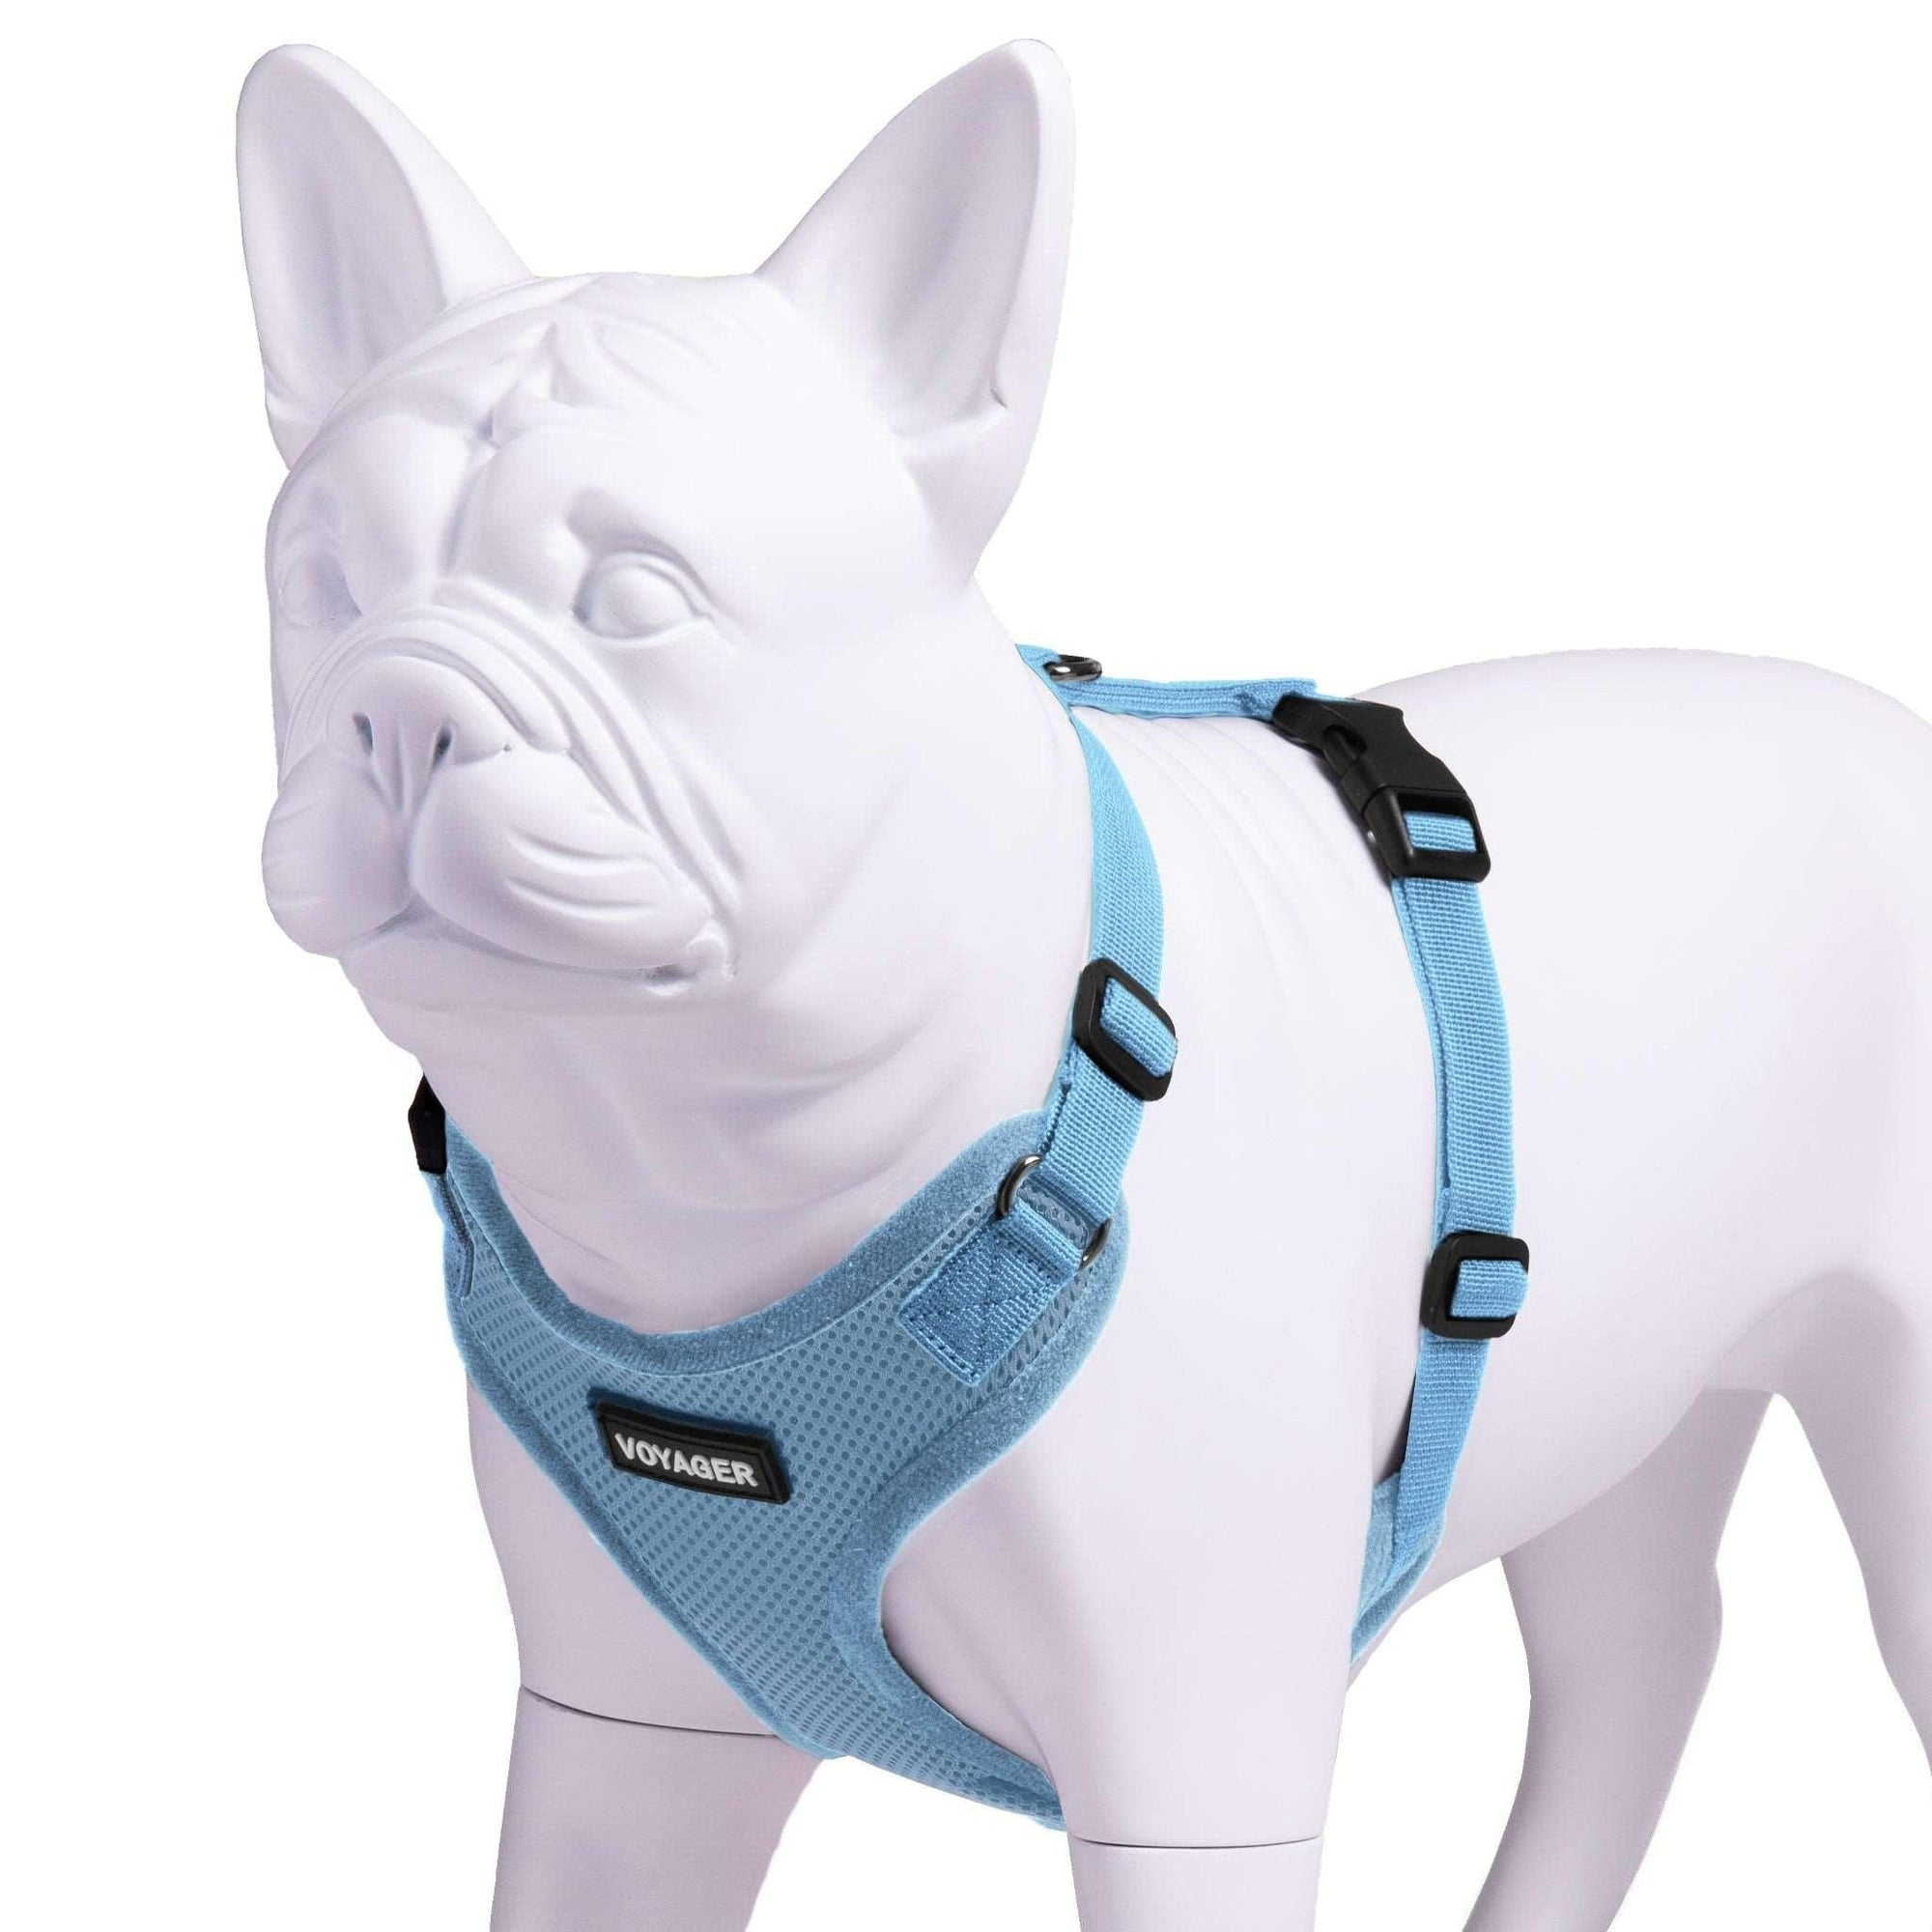 VOYAGER Step-In Lock Dog Harness in Baby Blue with Matching Trim and Webbing - Expanded